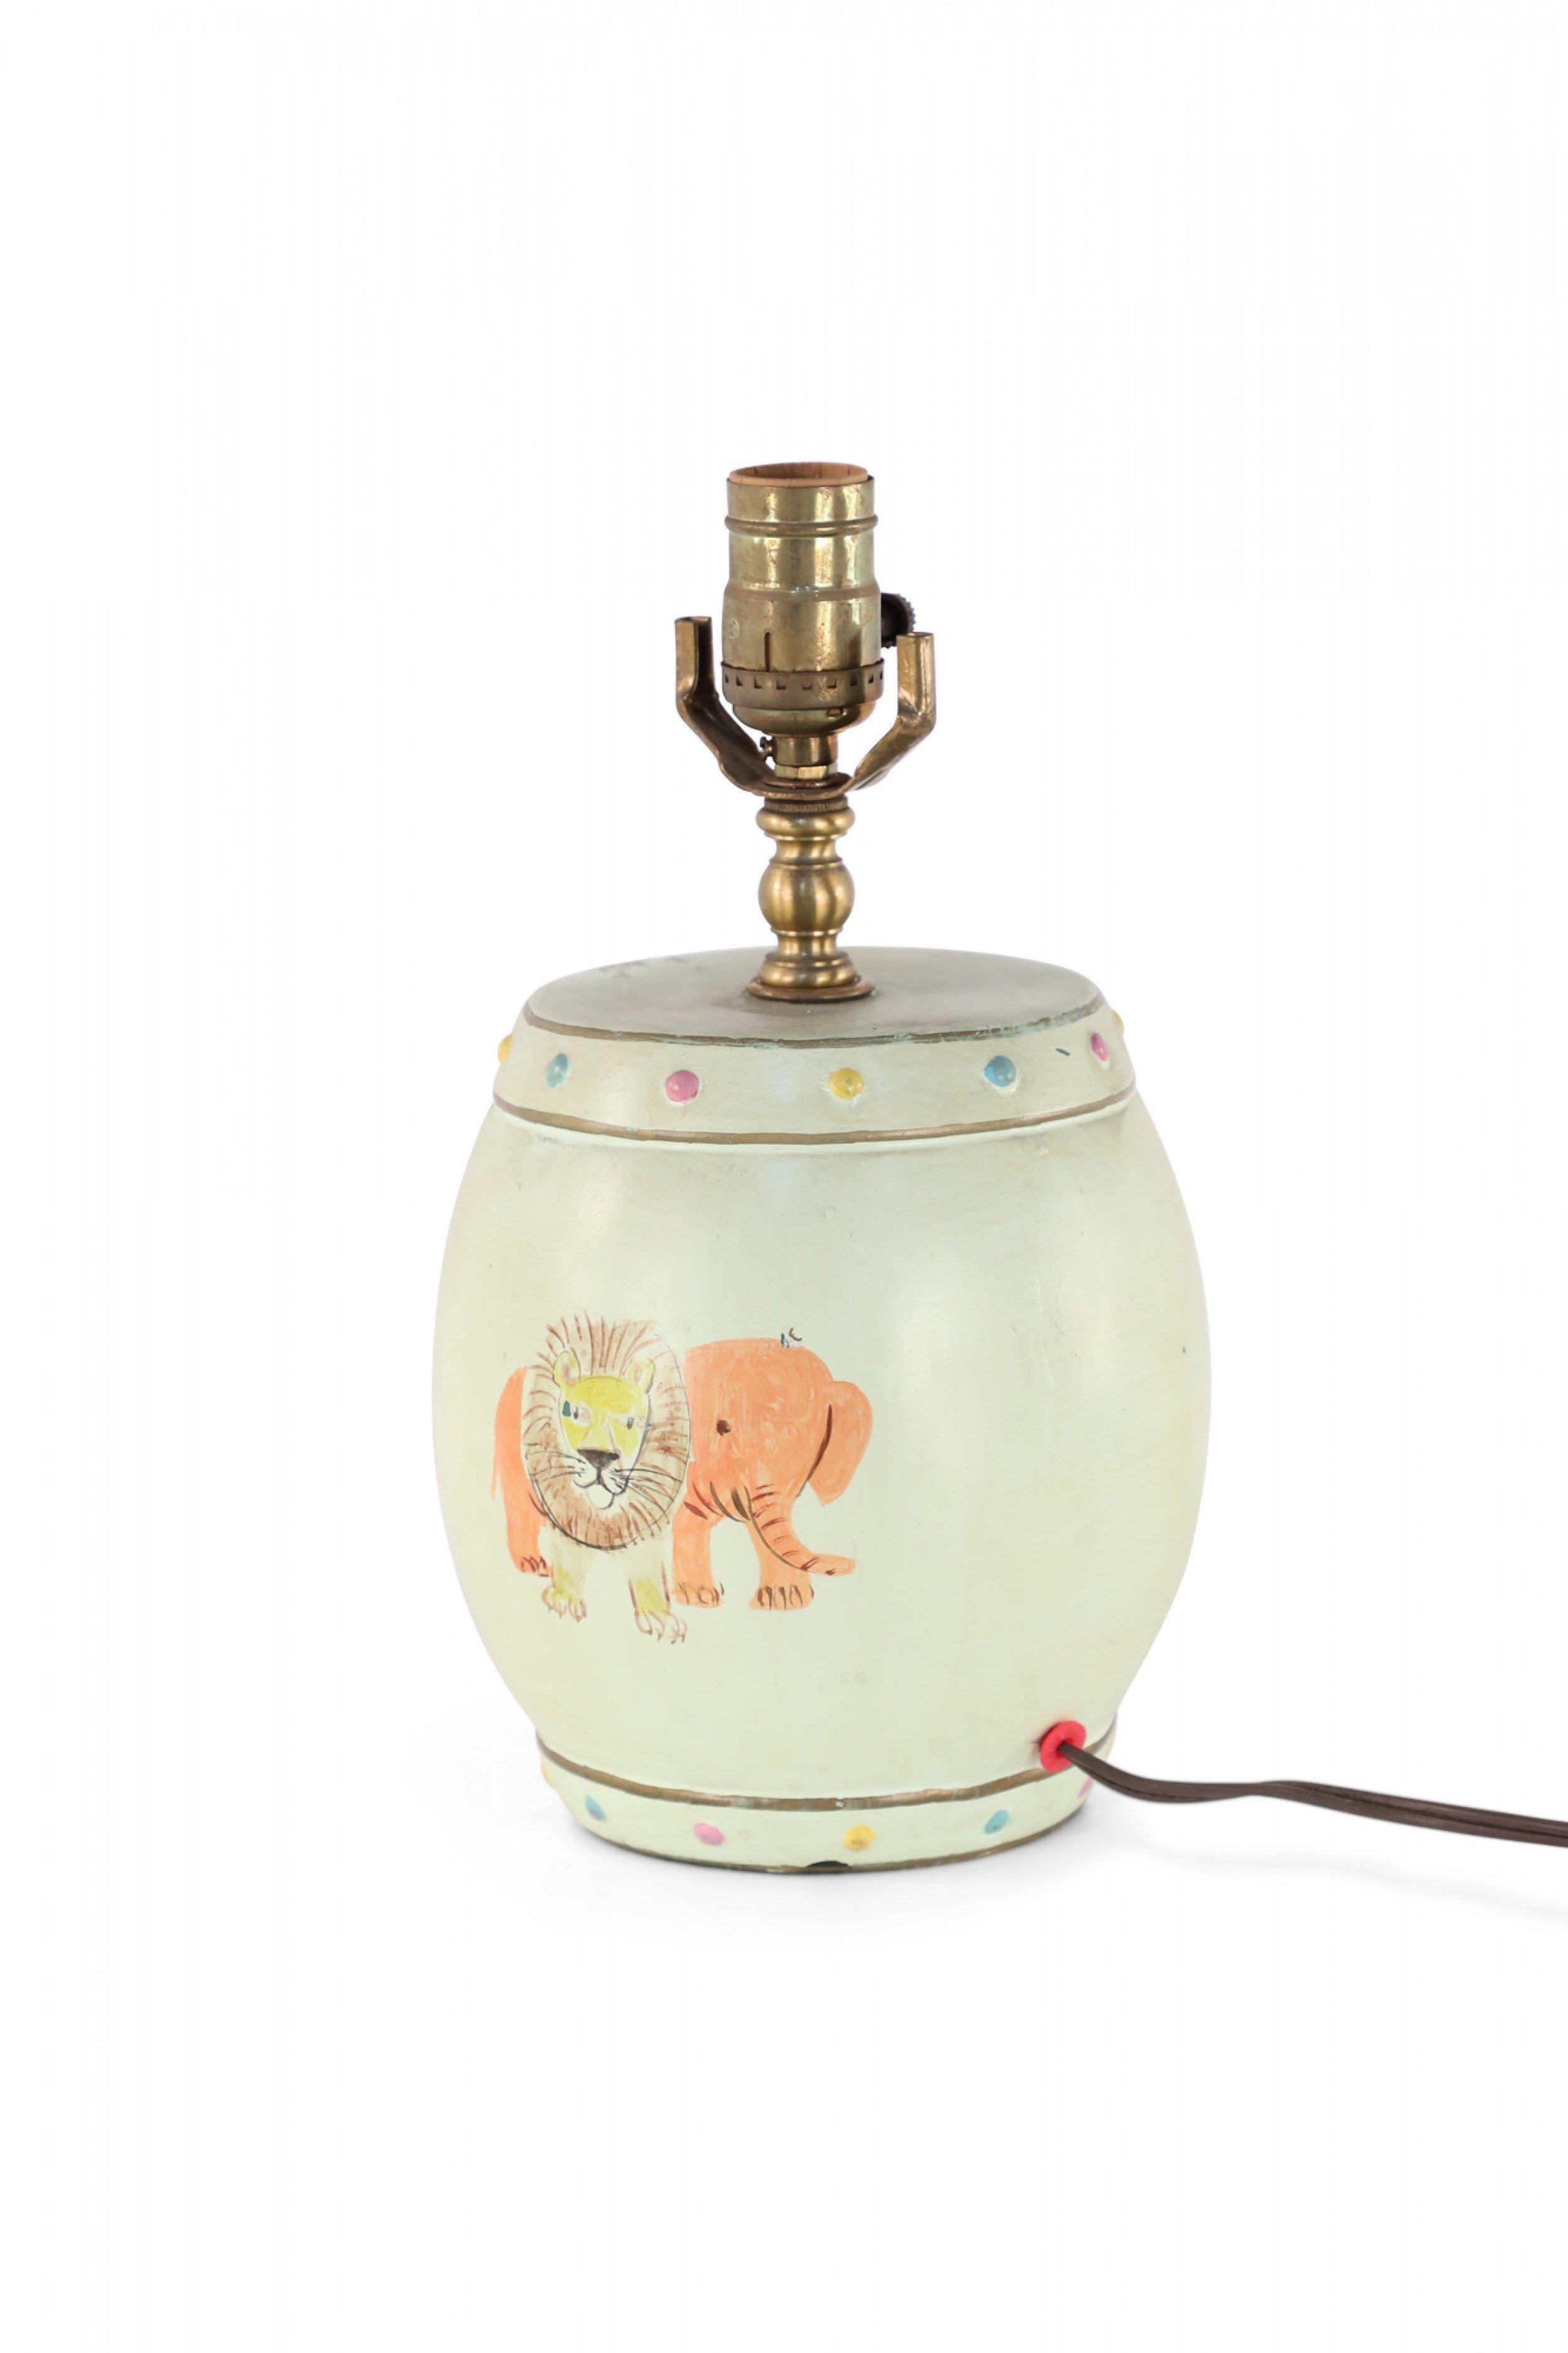 Chinese porcelain table lamp made from a pale green, barrel shaped vase painted with a joyful scene of a child on a horse and a lion and elephant on the reverse side, finished with brass hardware.
 